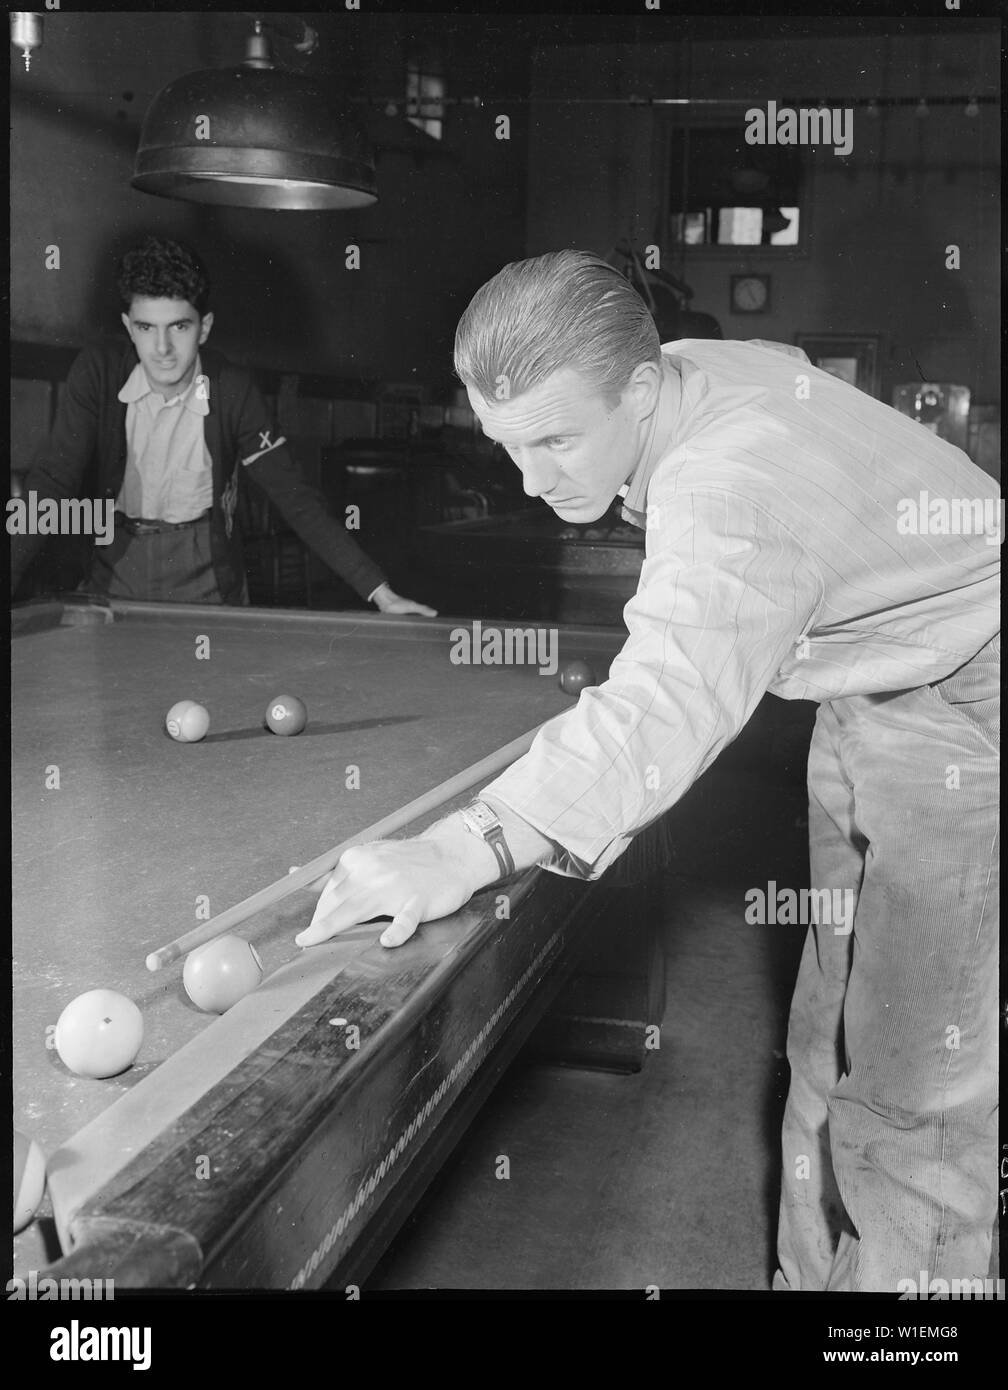 Hayward, California. Pool Recreation. Ten minutes to four by the wrist watch of this high school boy with the cue. In contrast to the gloomy, ill-lit interior of the pool hall, it was a sunny Saturday afternoon outdoors. These two boys were part of a group that had been loafing around the pool hall since about 10:00 that morning. They planned to drift together again the next day and spend their Sunday in the same idle manner Stock Photo